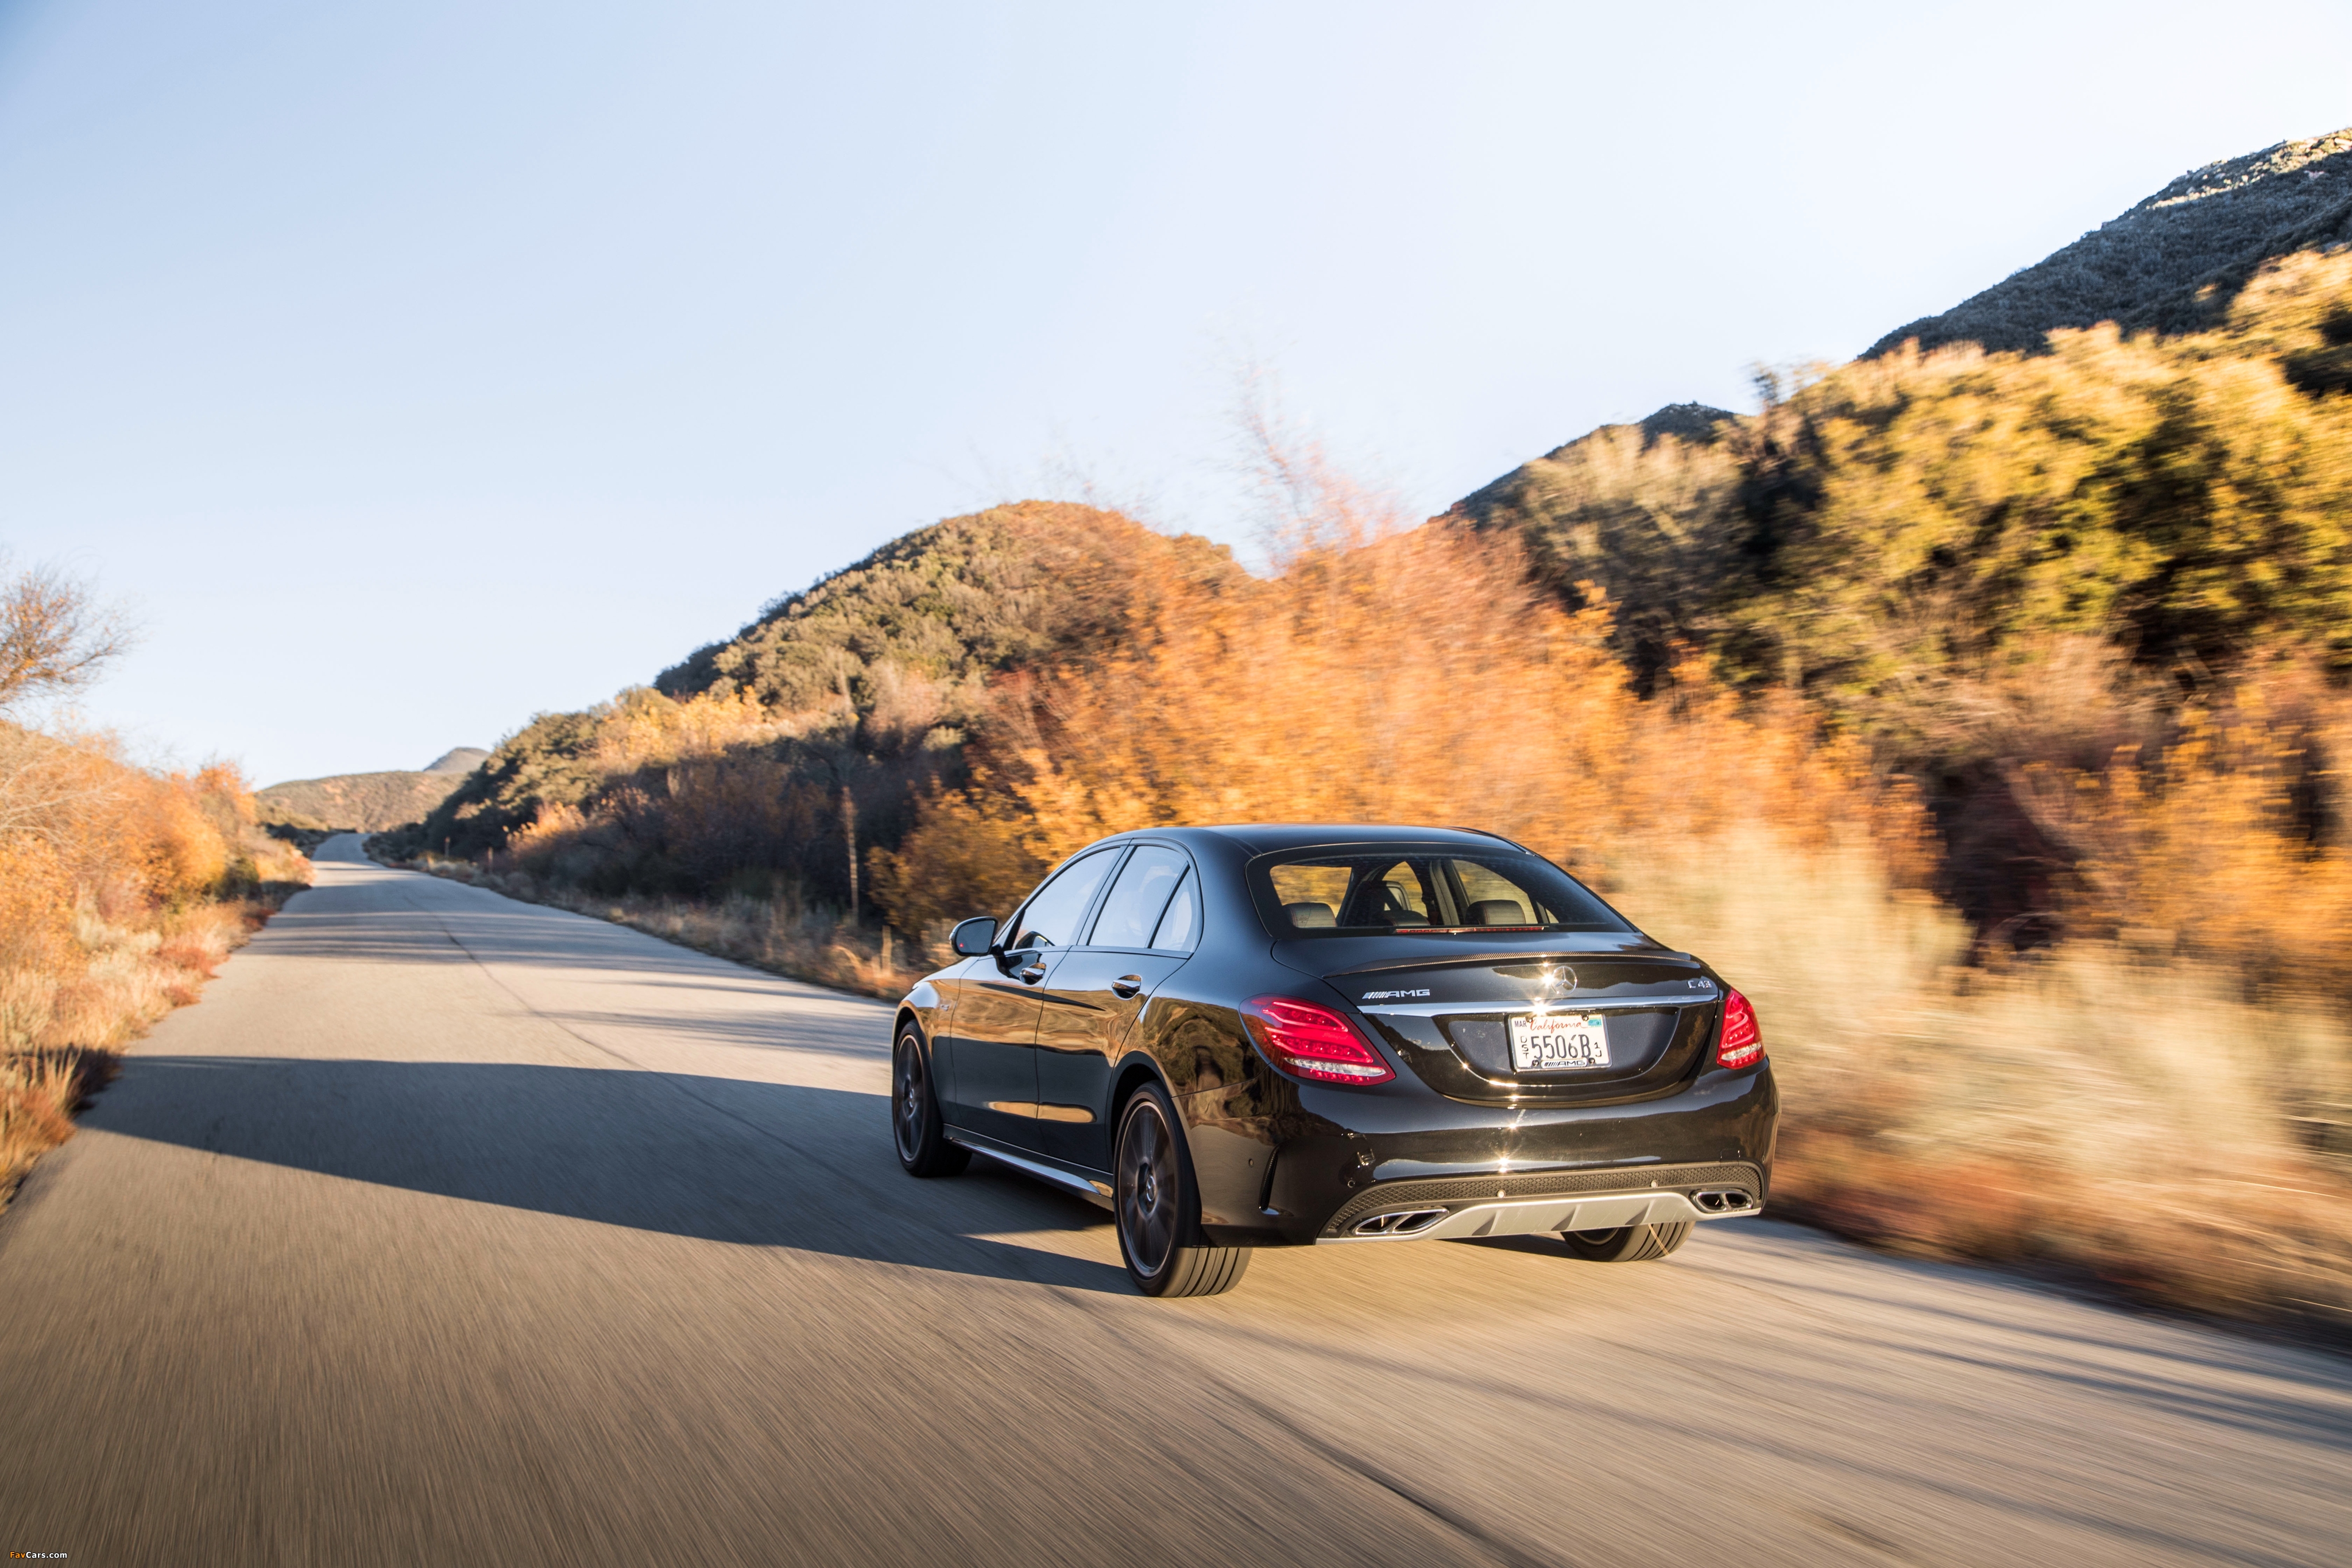 Mercedes-AMG C 43 4MATIC North America (W205) 2016 pictures (4096 x 2731)